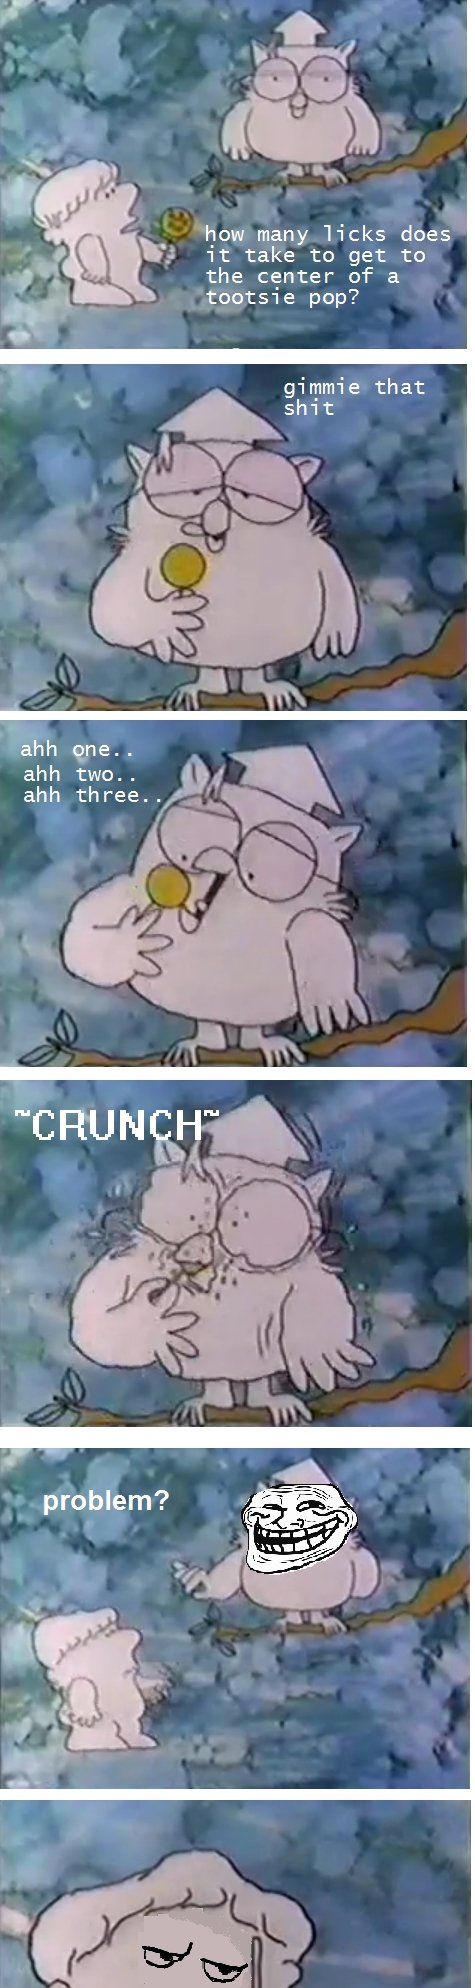 Troll Owl. oc. how many licks does it take to get to the center of a tootsie pop? gimmie that shit. I like to think he does it because the boy always asks &quot;Mr, Owl..&quot; when clearly he is Professor Owl.